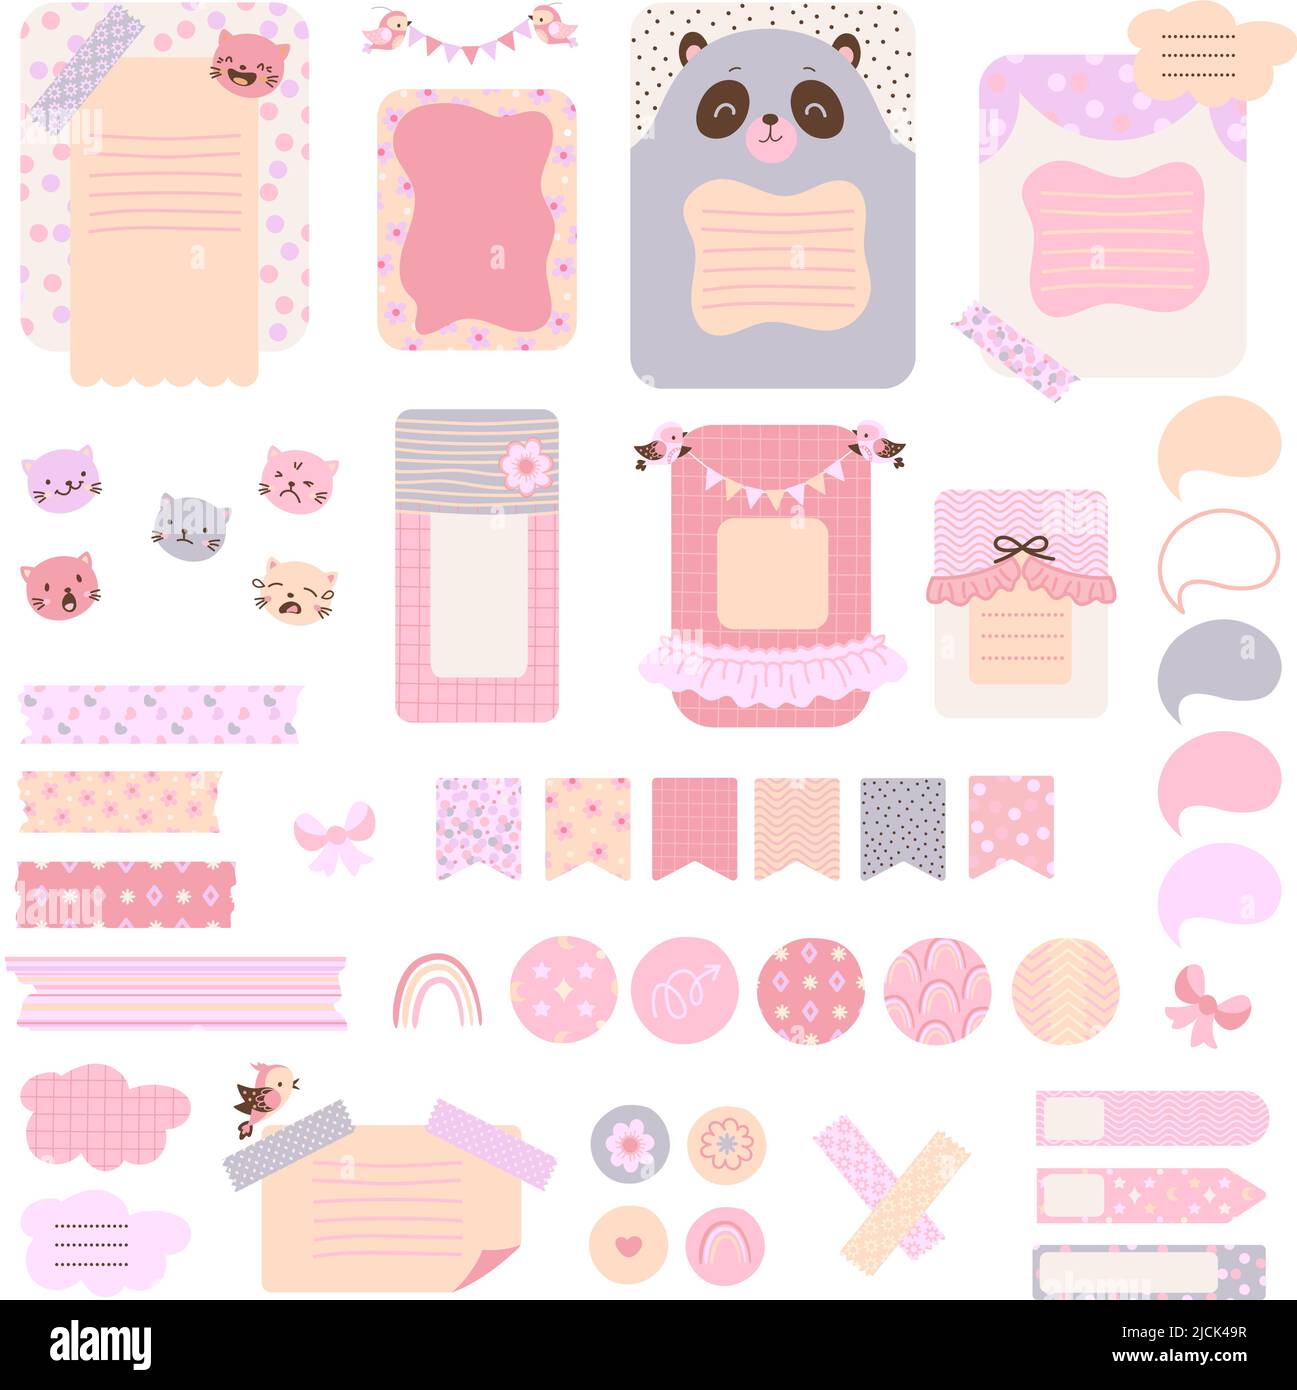 Scrapbook cute elements. Beauty sticker notes, kids planning or journal note stickers. Scrapbooking, daily planner decor or diary nowaday vector Stock Vector